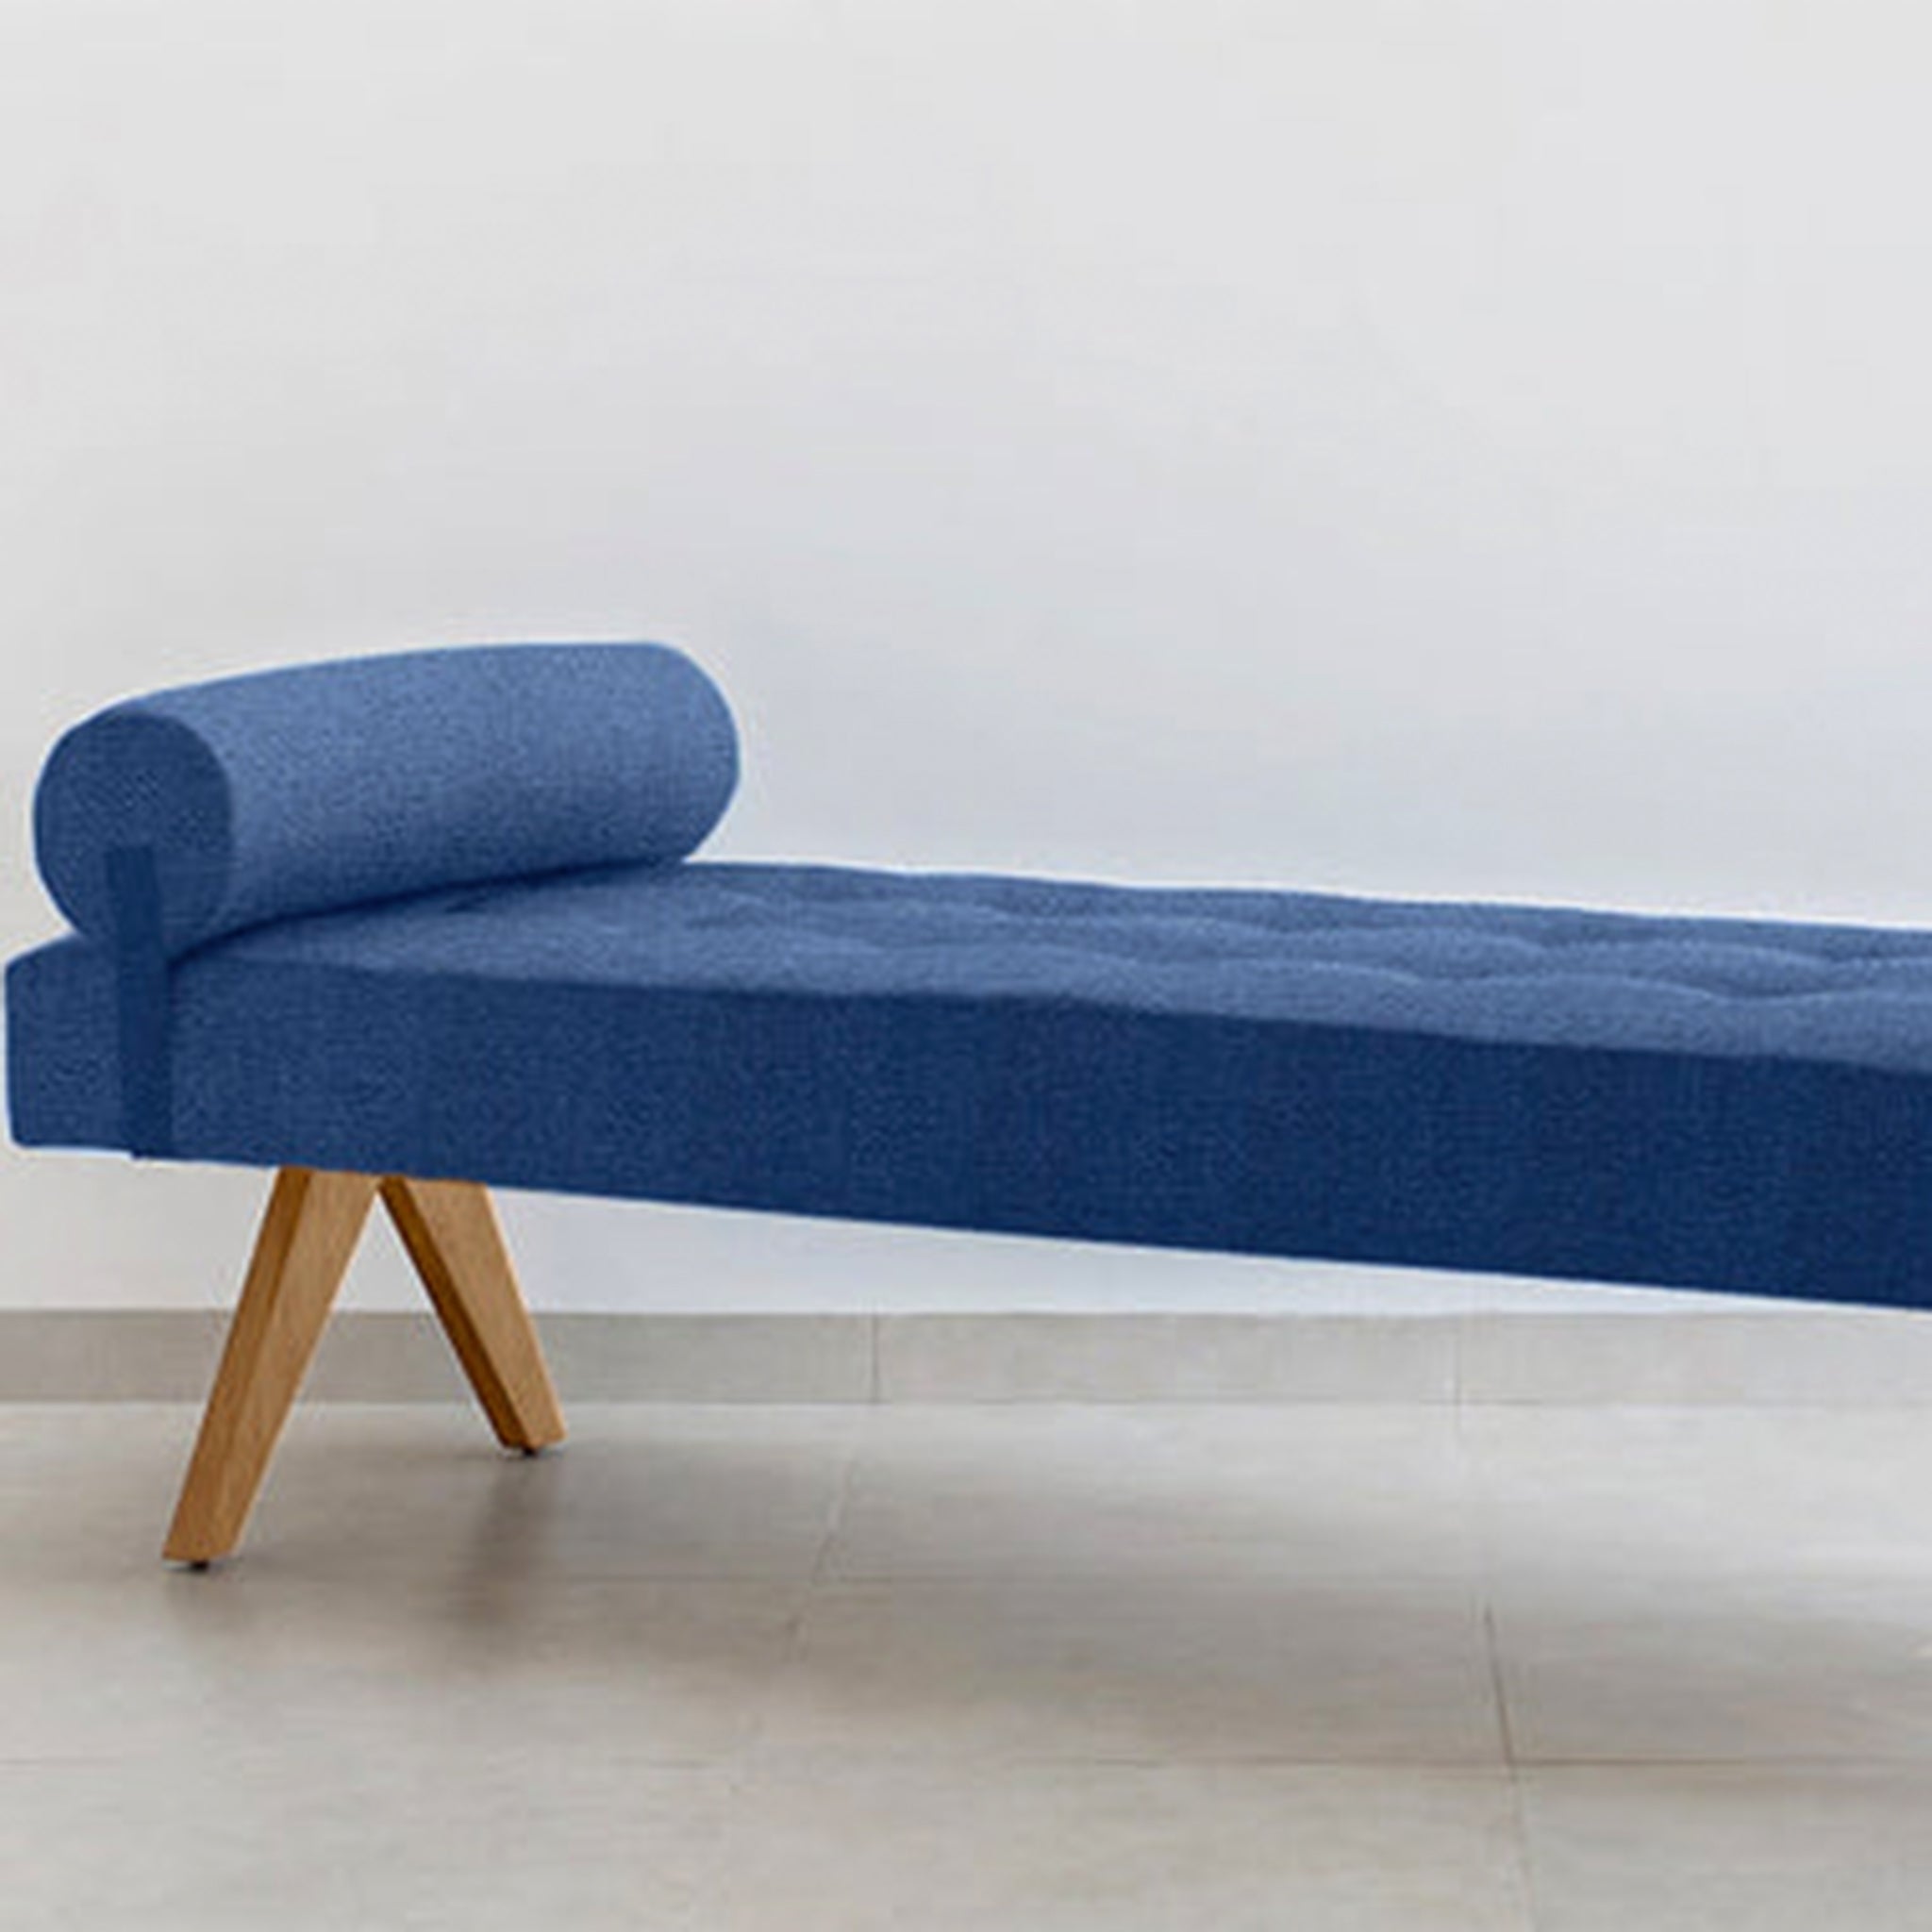 The Jack Daybed with plush upholstery